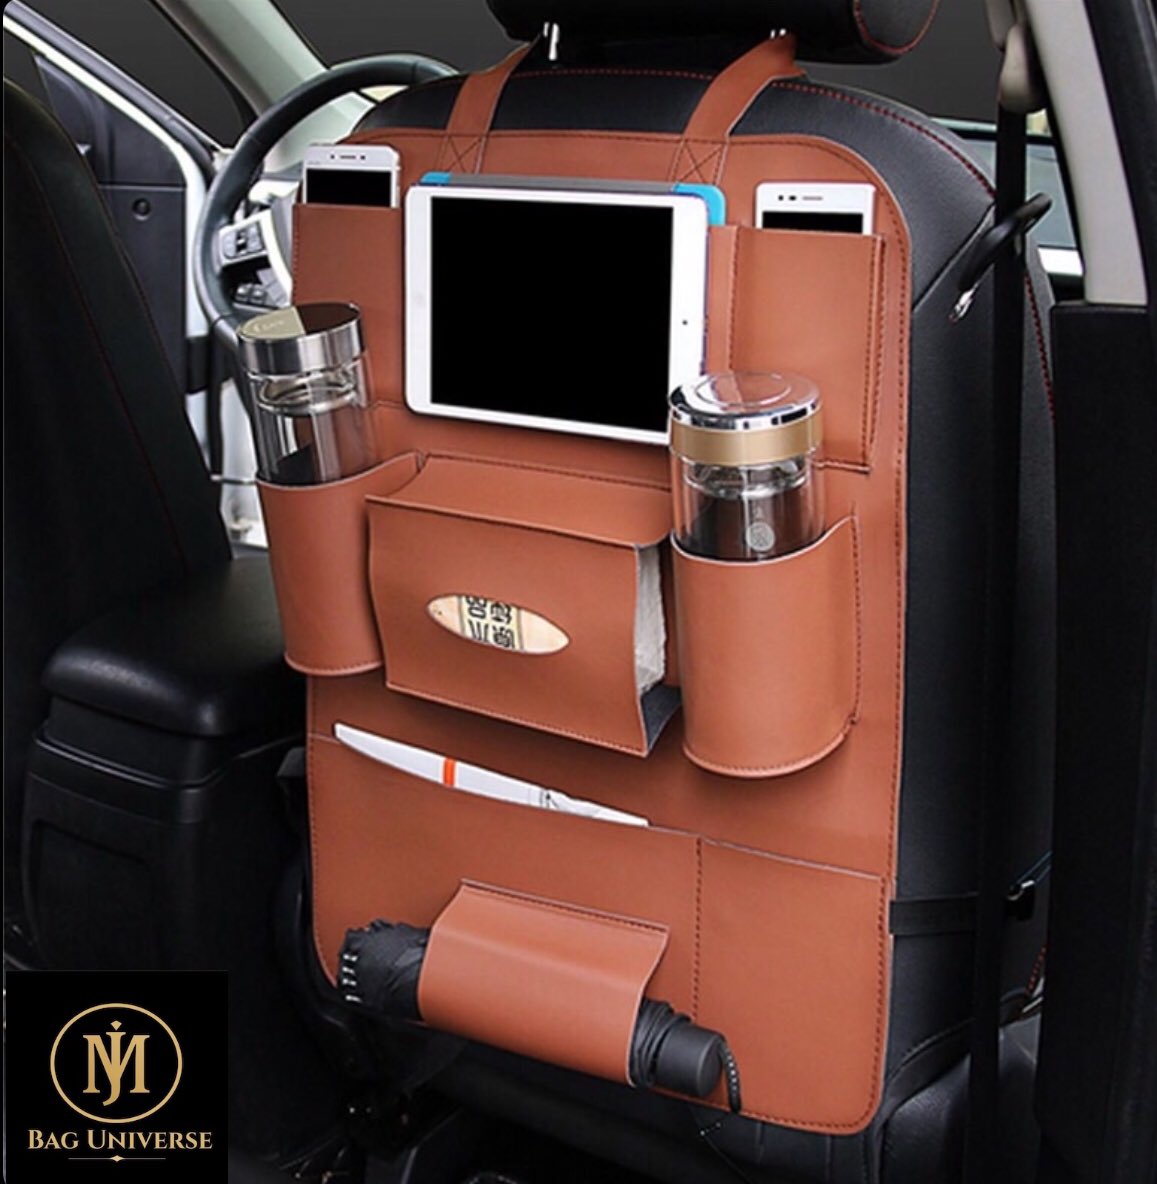 We got all the colours!....you all love organised cars 🚘....get your car seat organizers yoday call/whatsapp +256708091881
#CarOrganisers #carInteriorDesign